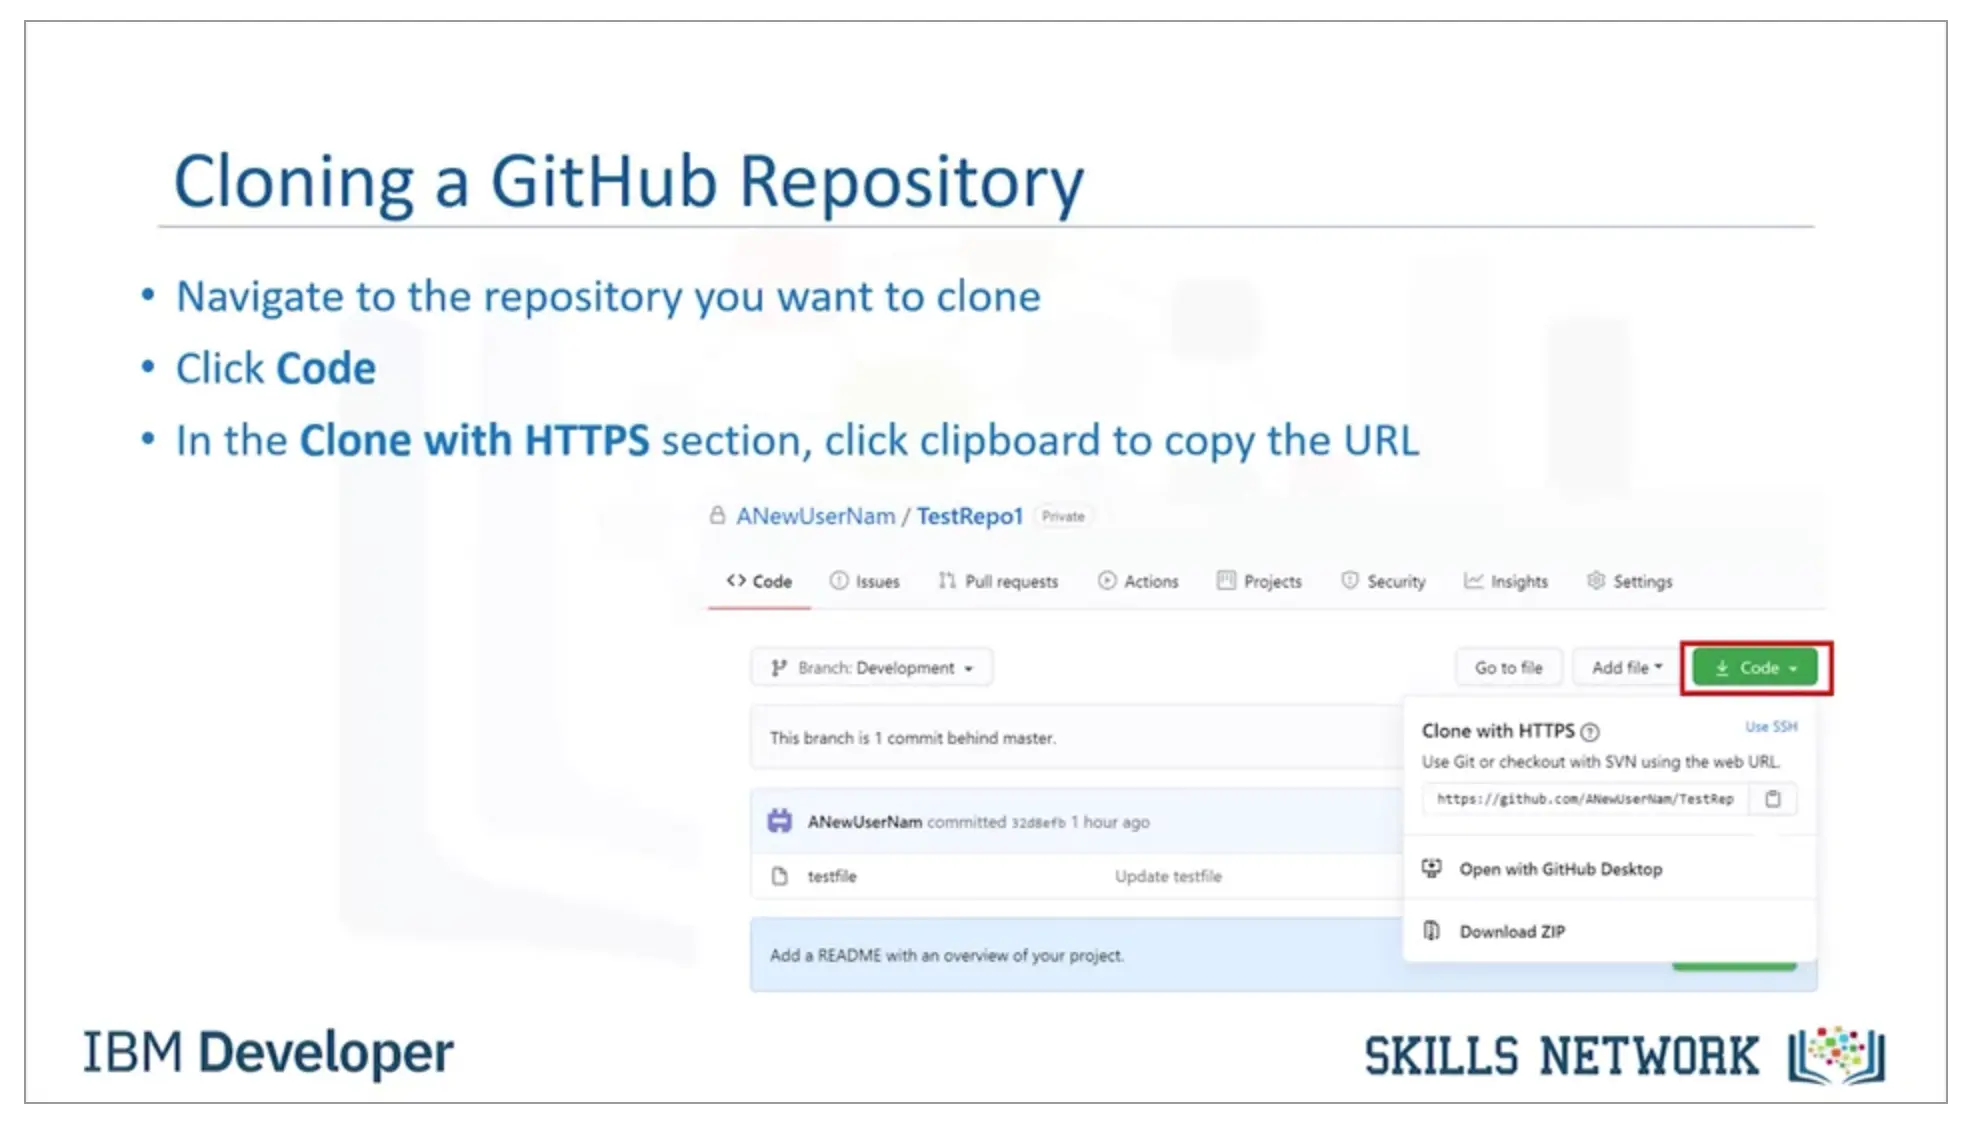 Course 3: Getting Started with Git and GitHub